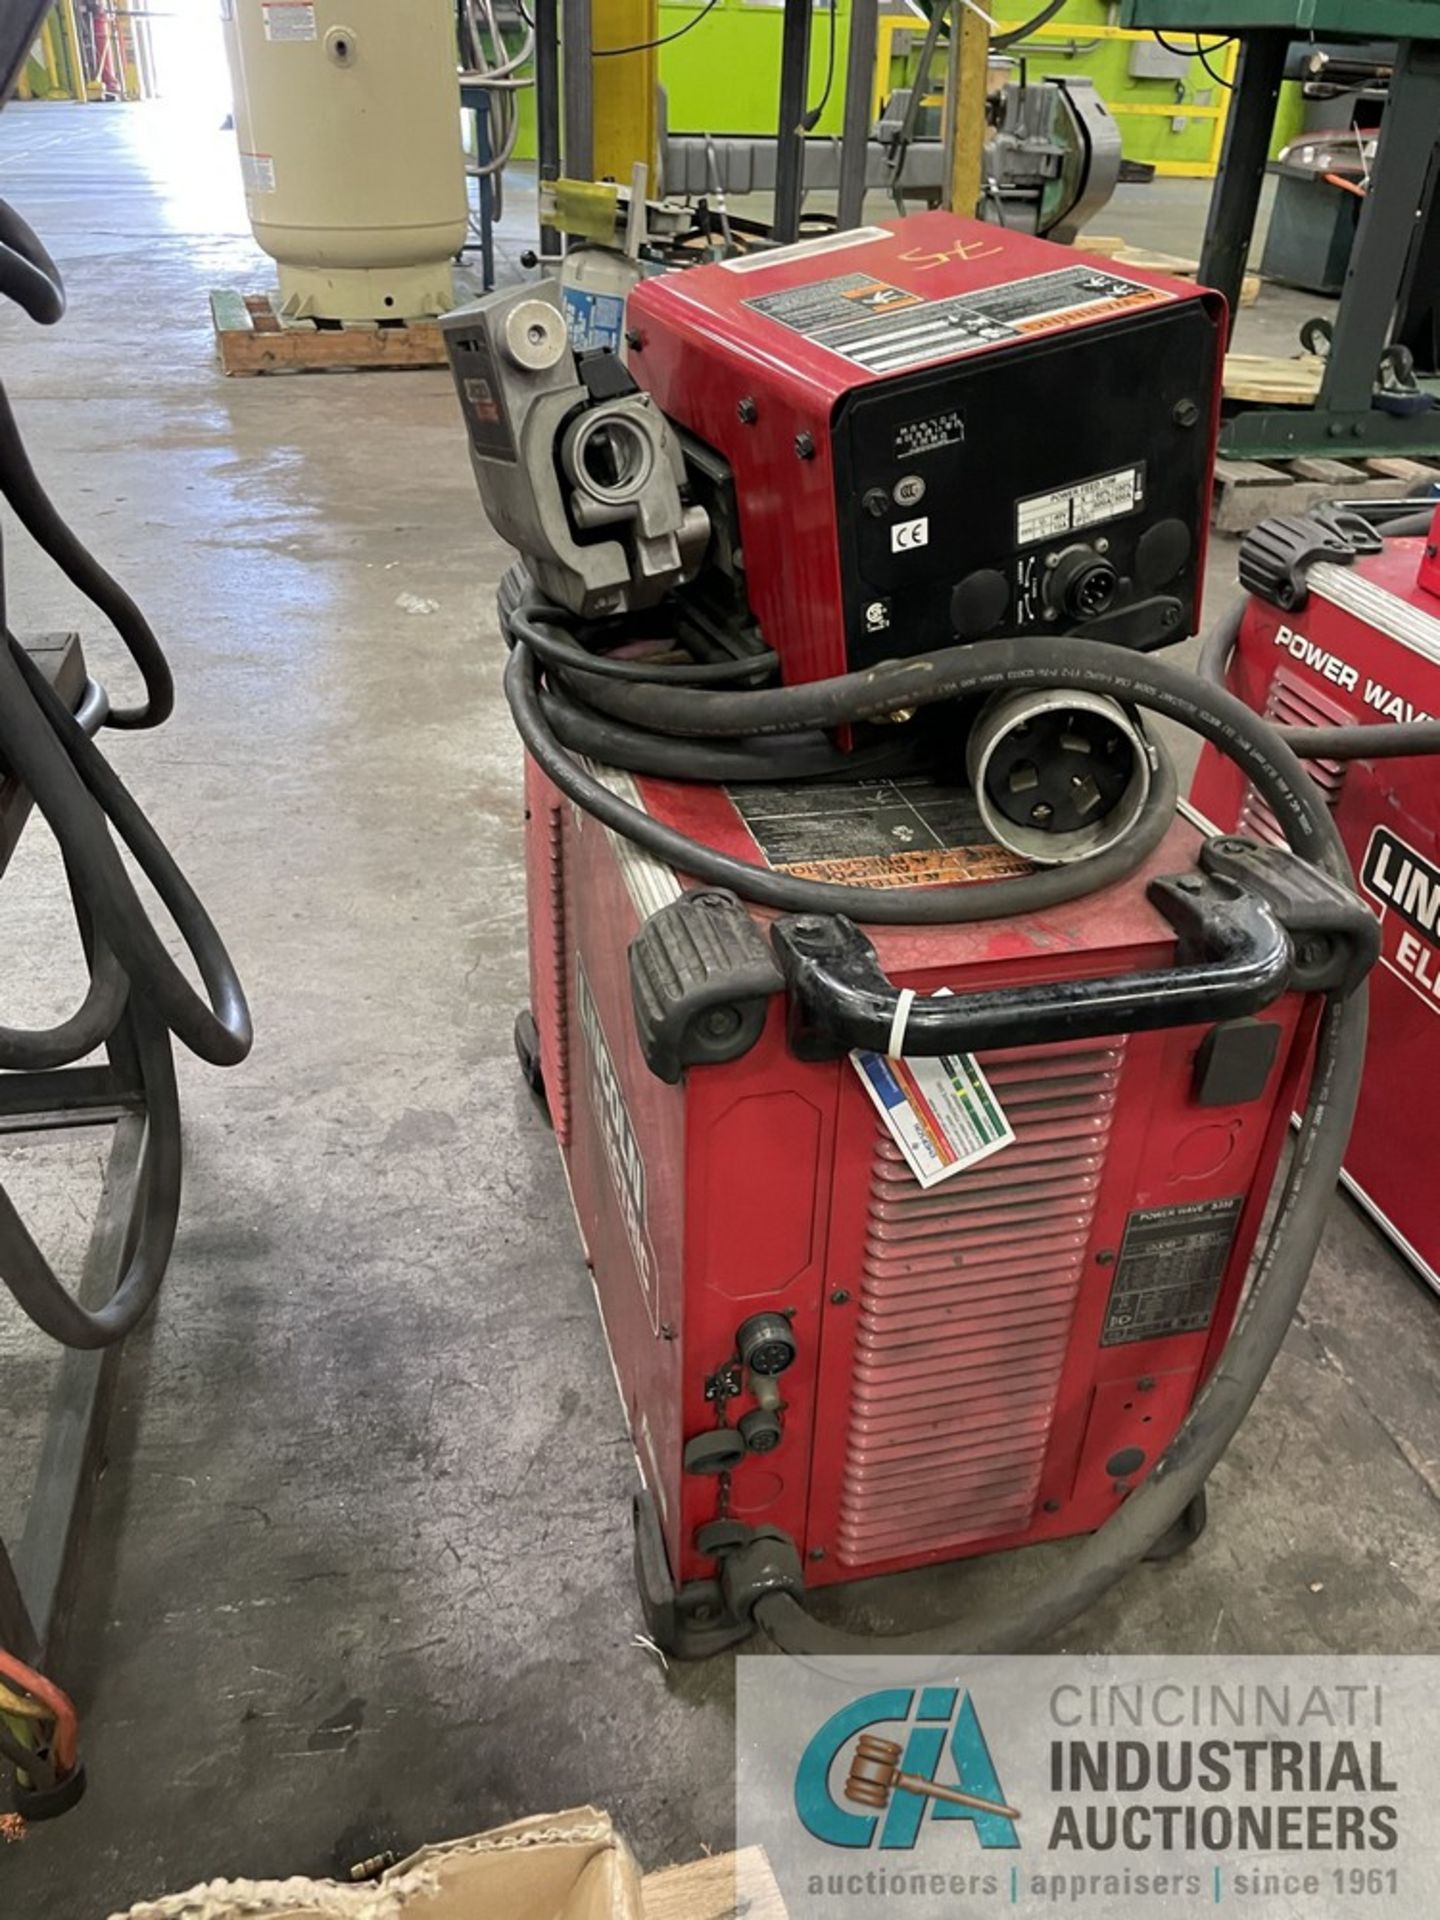 350 AMP LINCOLN S350 POWER WAVE ADVANCED PROCESS WELDER S/N U1130809387 WITH POWER FEED 10M WIRE - Image 2 of 5